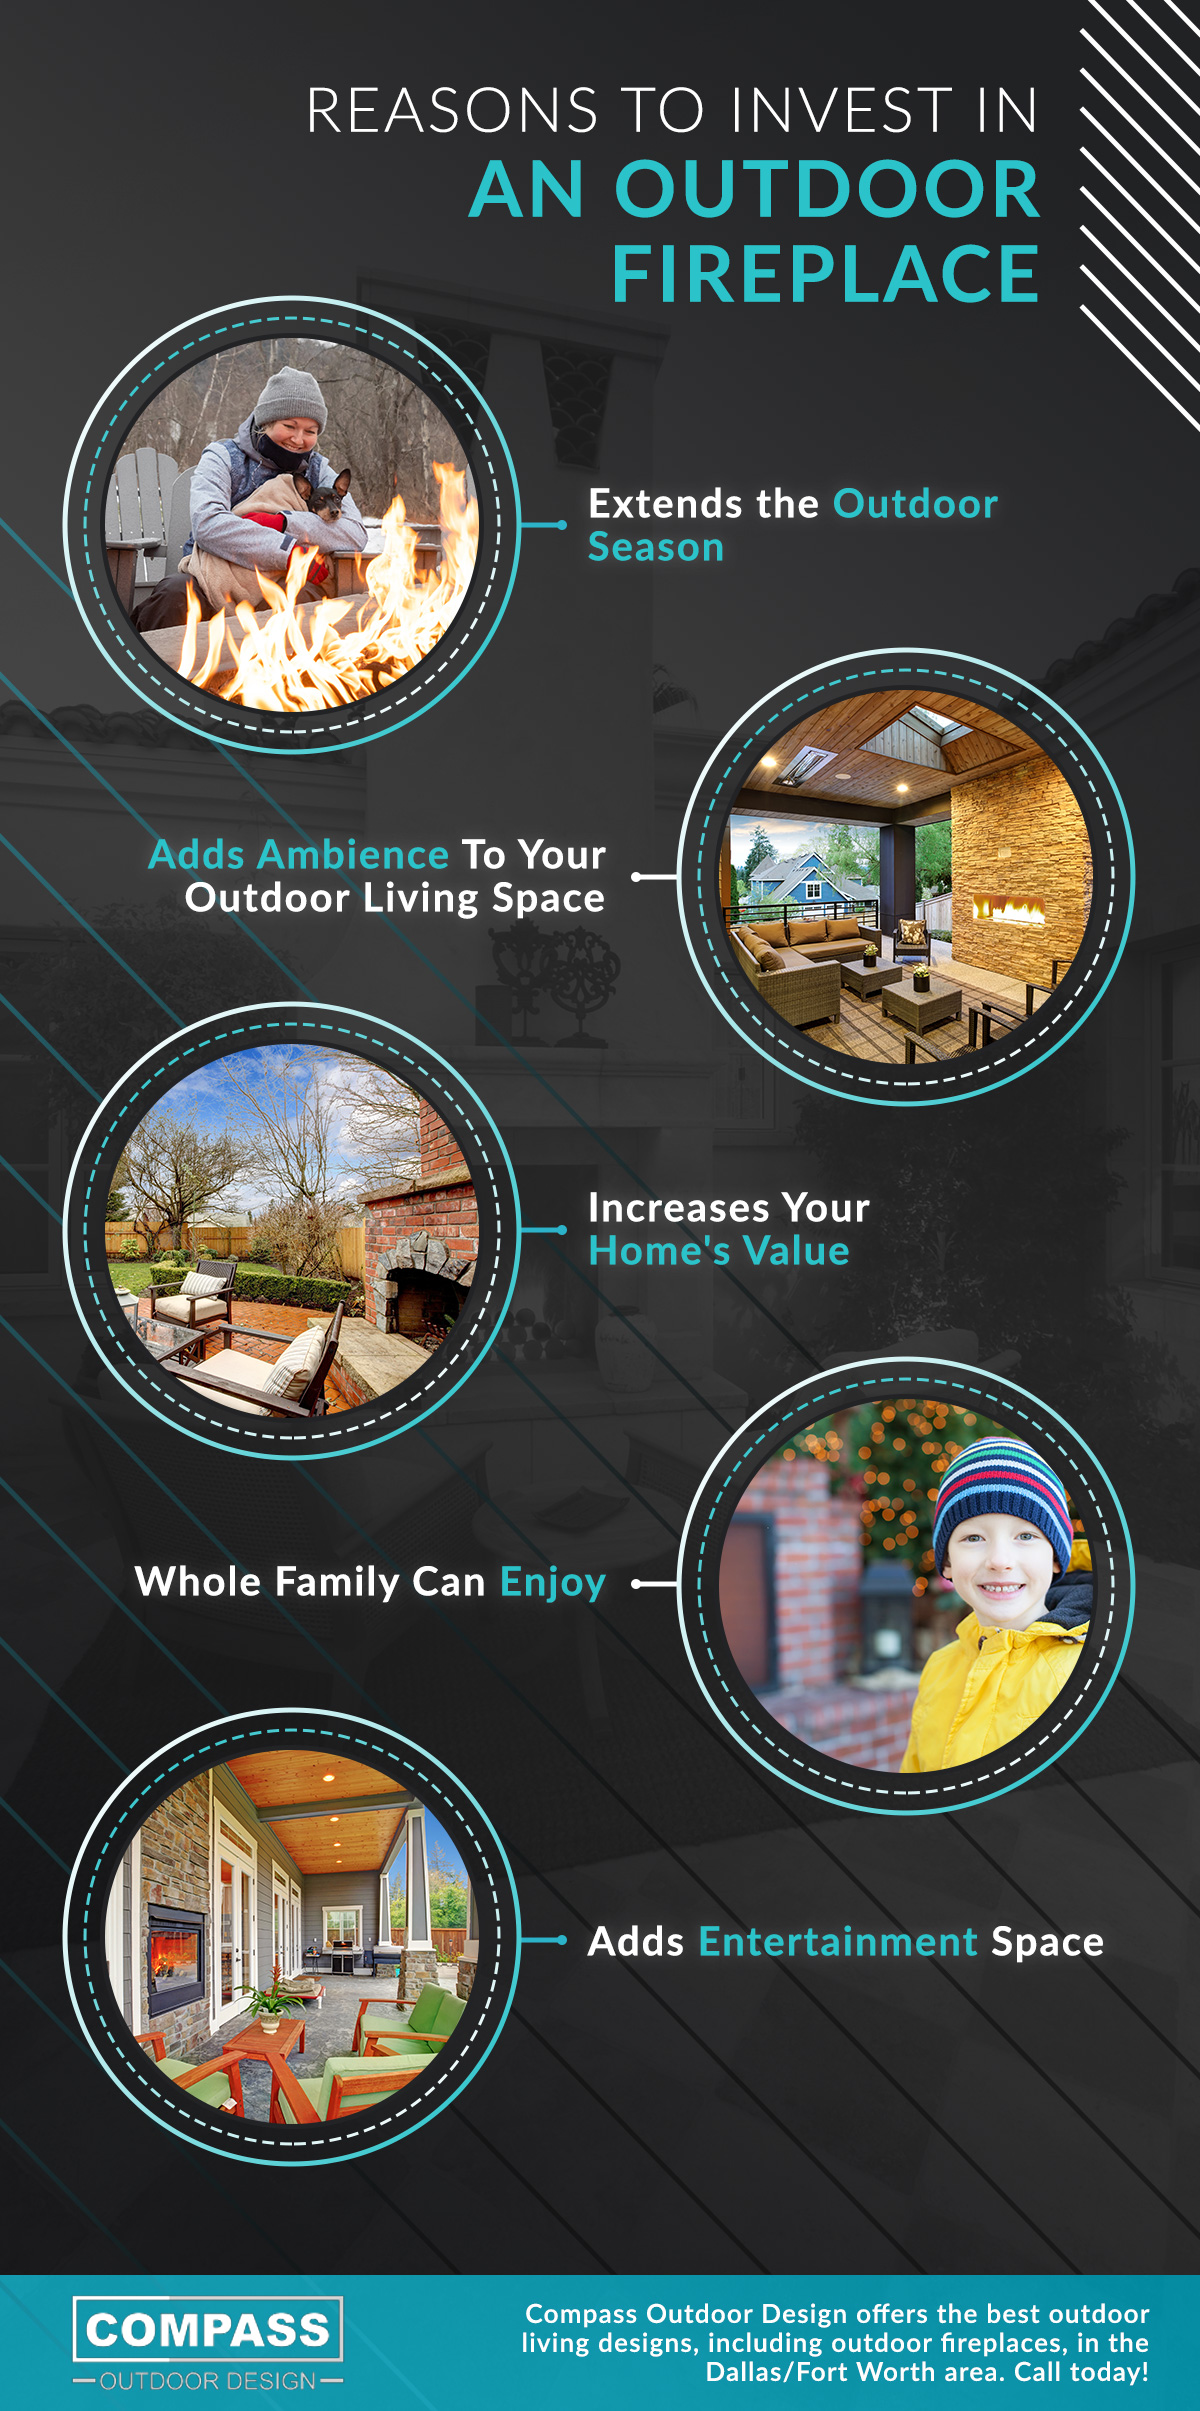 Reasons to invest in an outdoor fireplace infographic